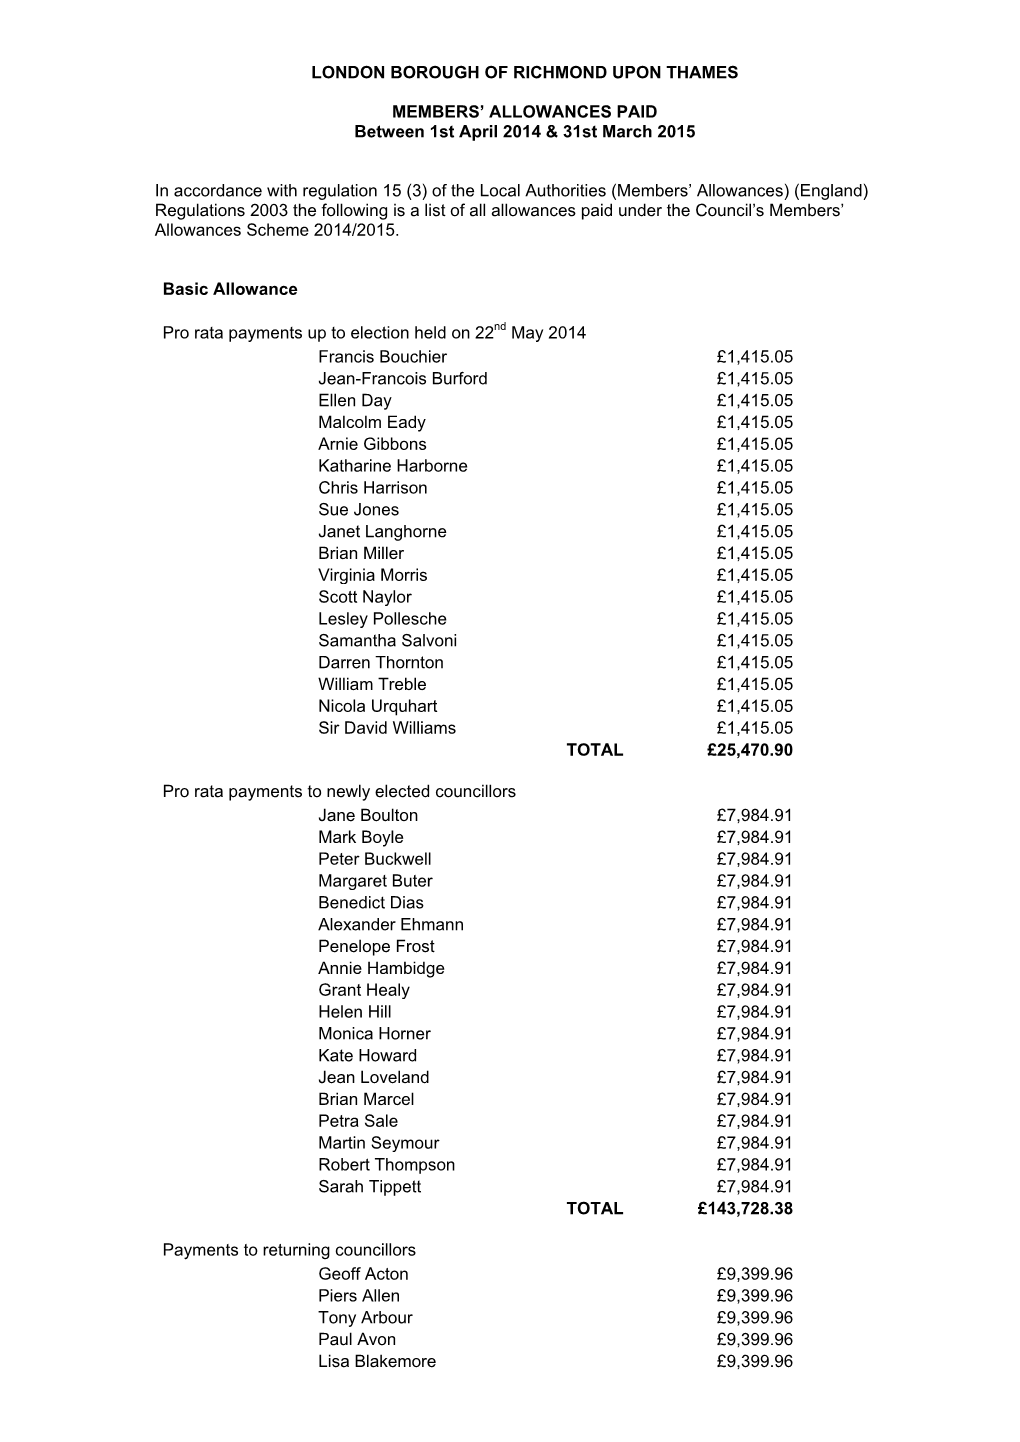 Members' Allowances Paid in 2014/15